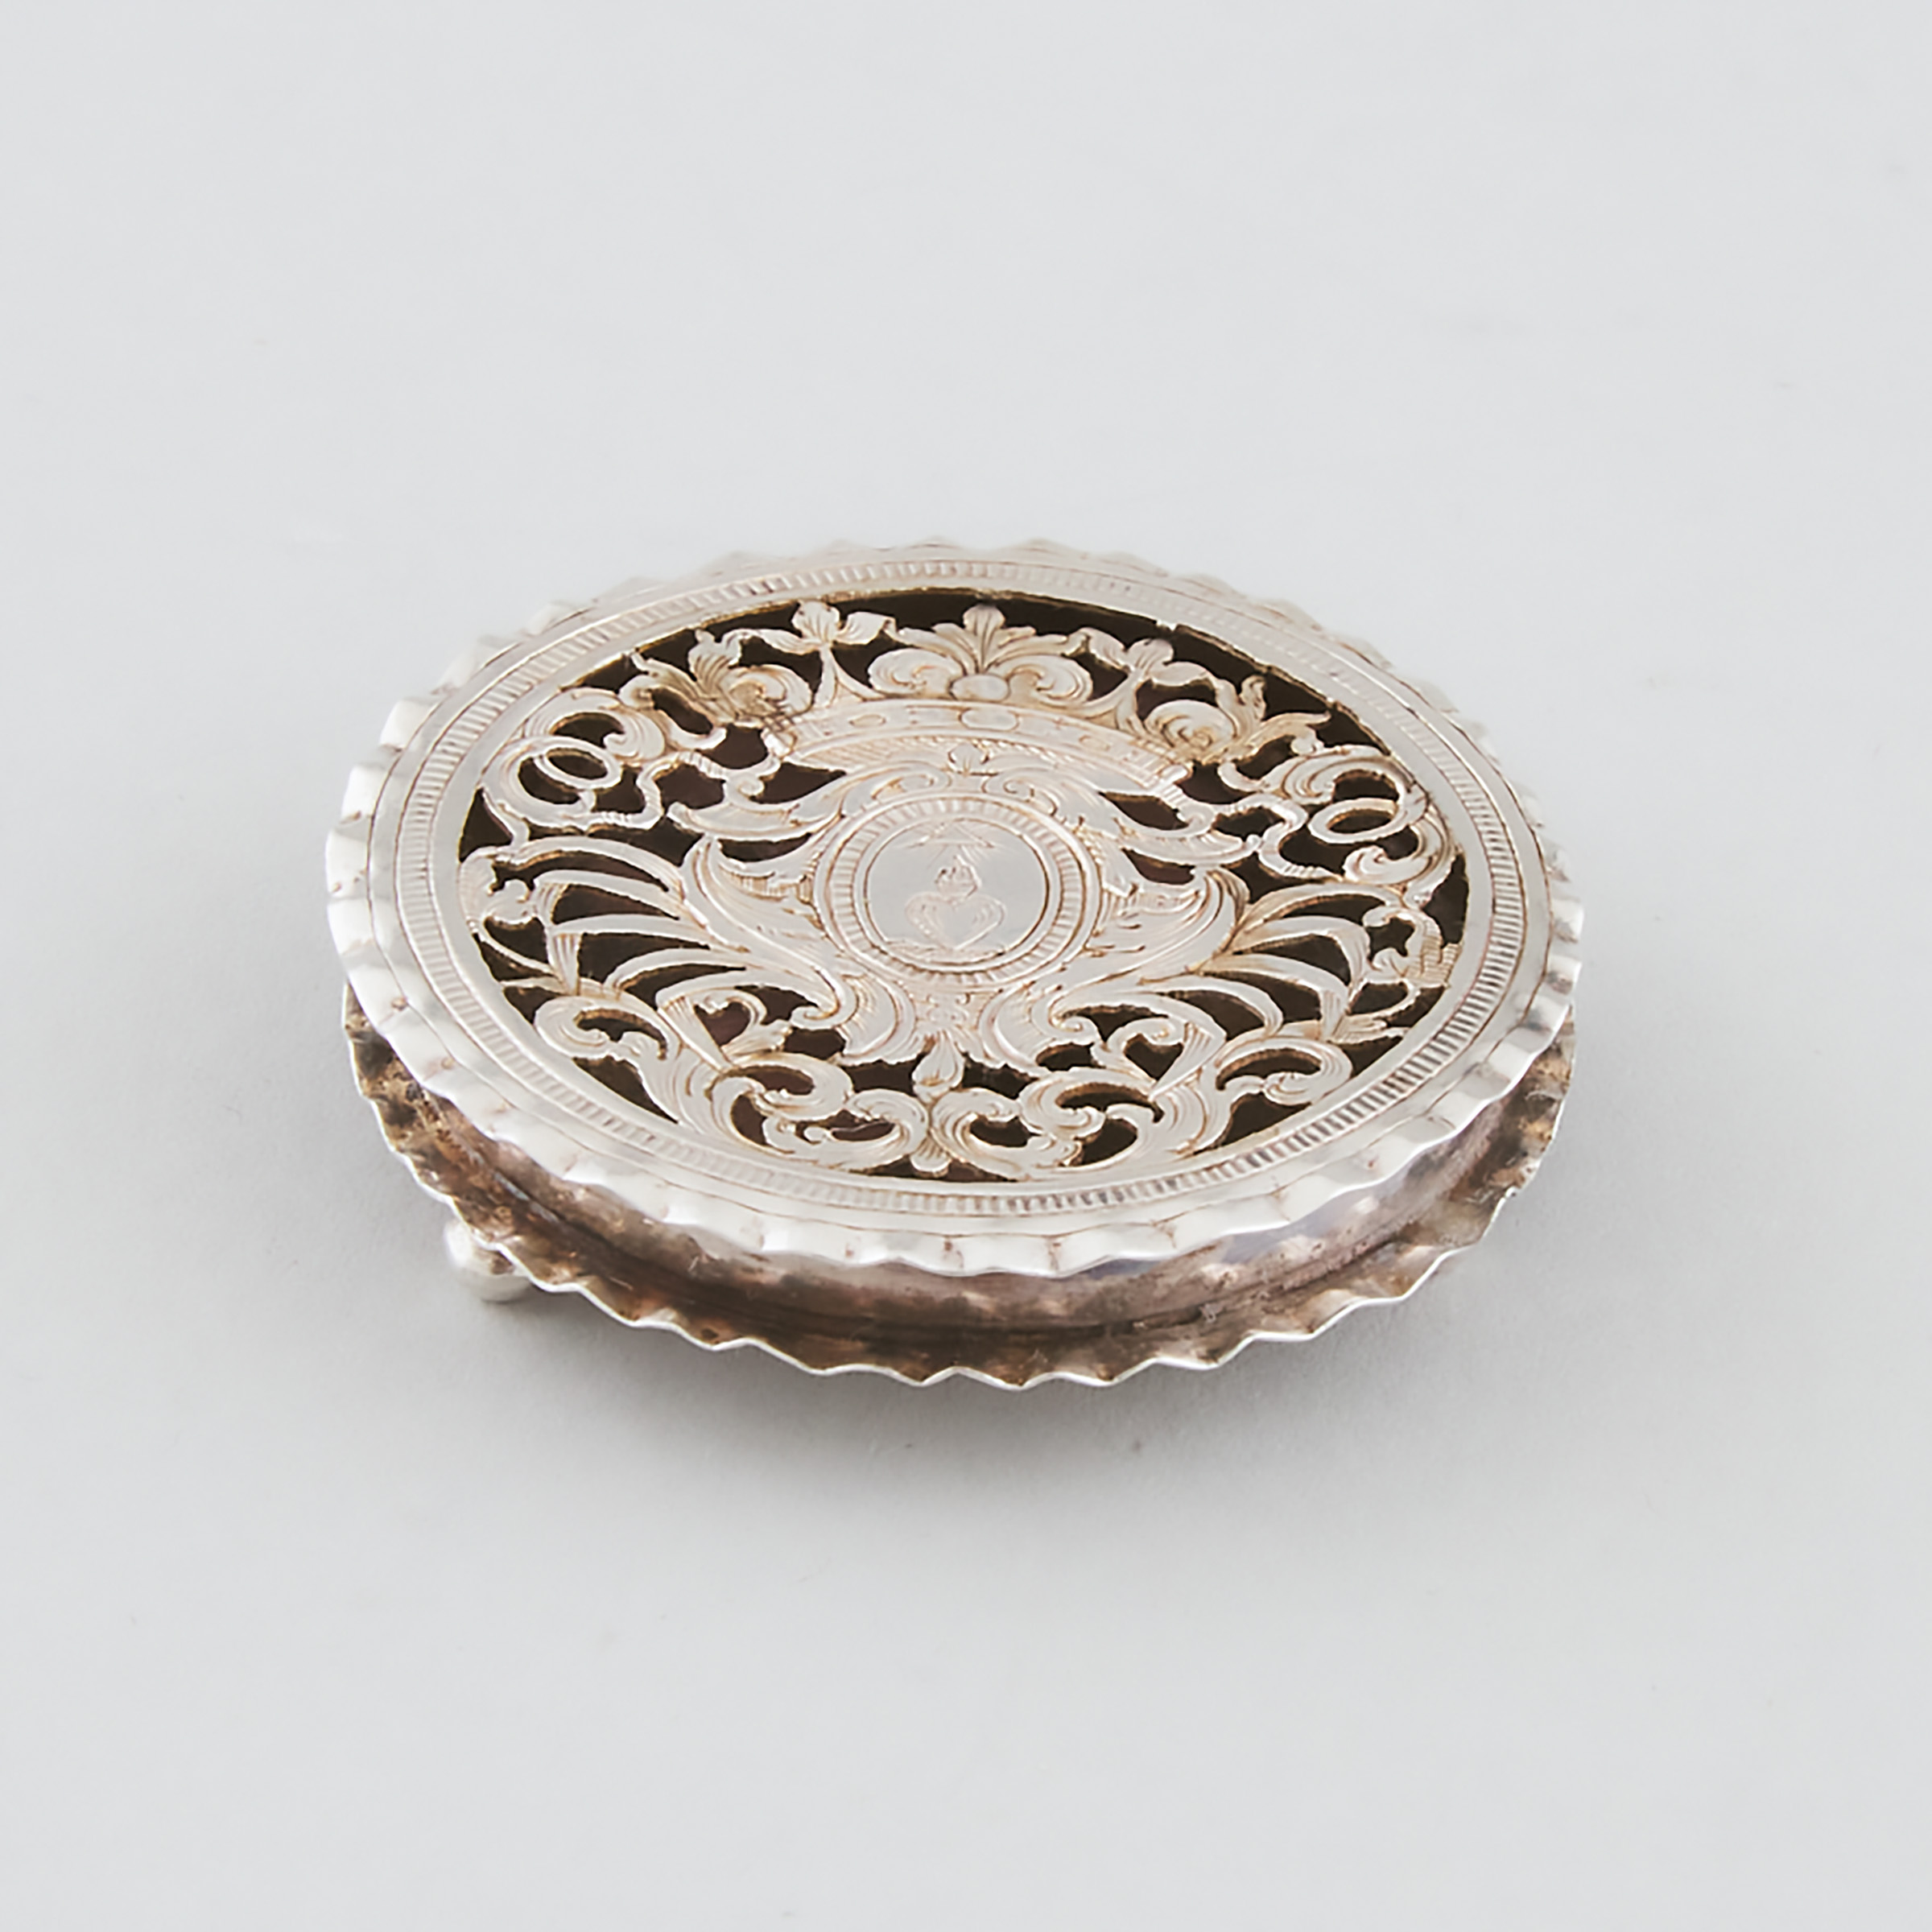 Late 17th Century English Silver 2a564d